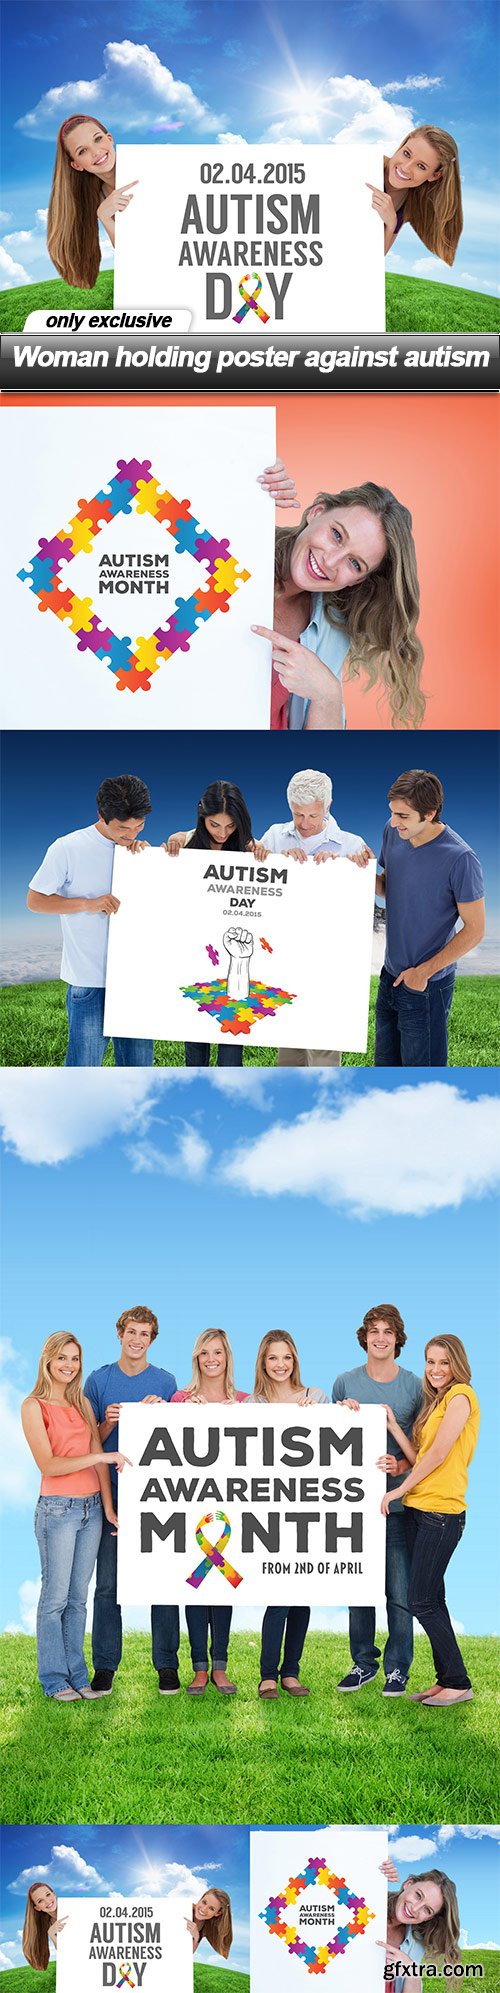 Woman holding poster against autism - 5 UHQ JPEG